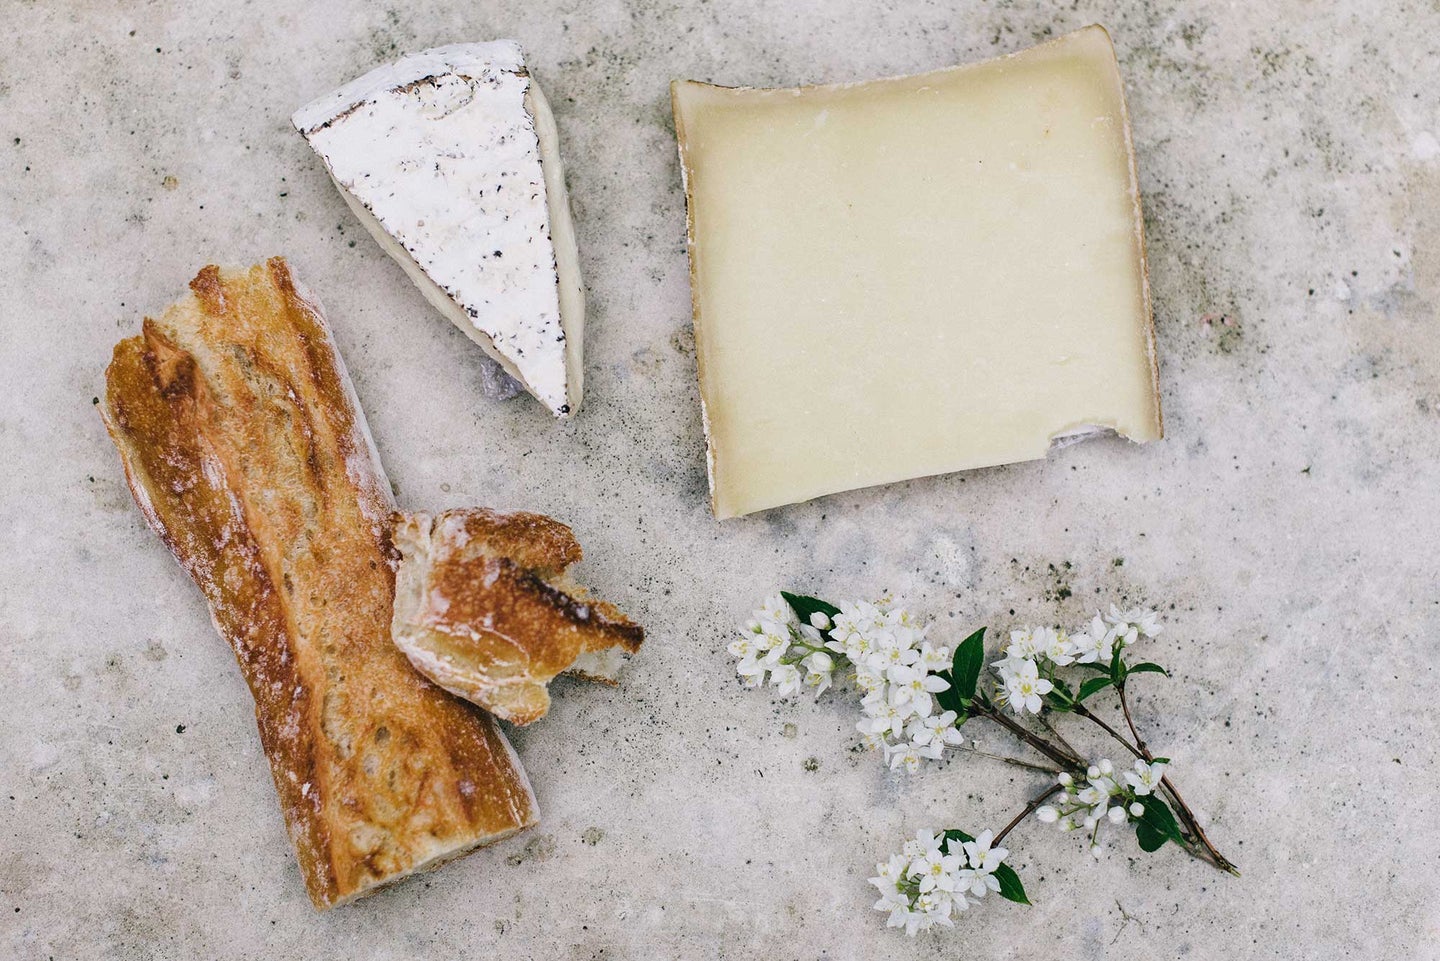 Beautiful cheeses and a crusty loaf of bread